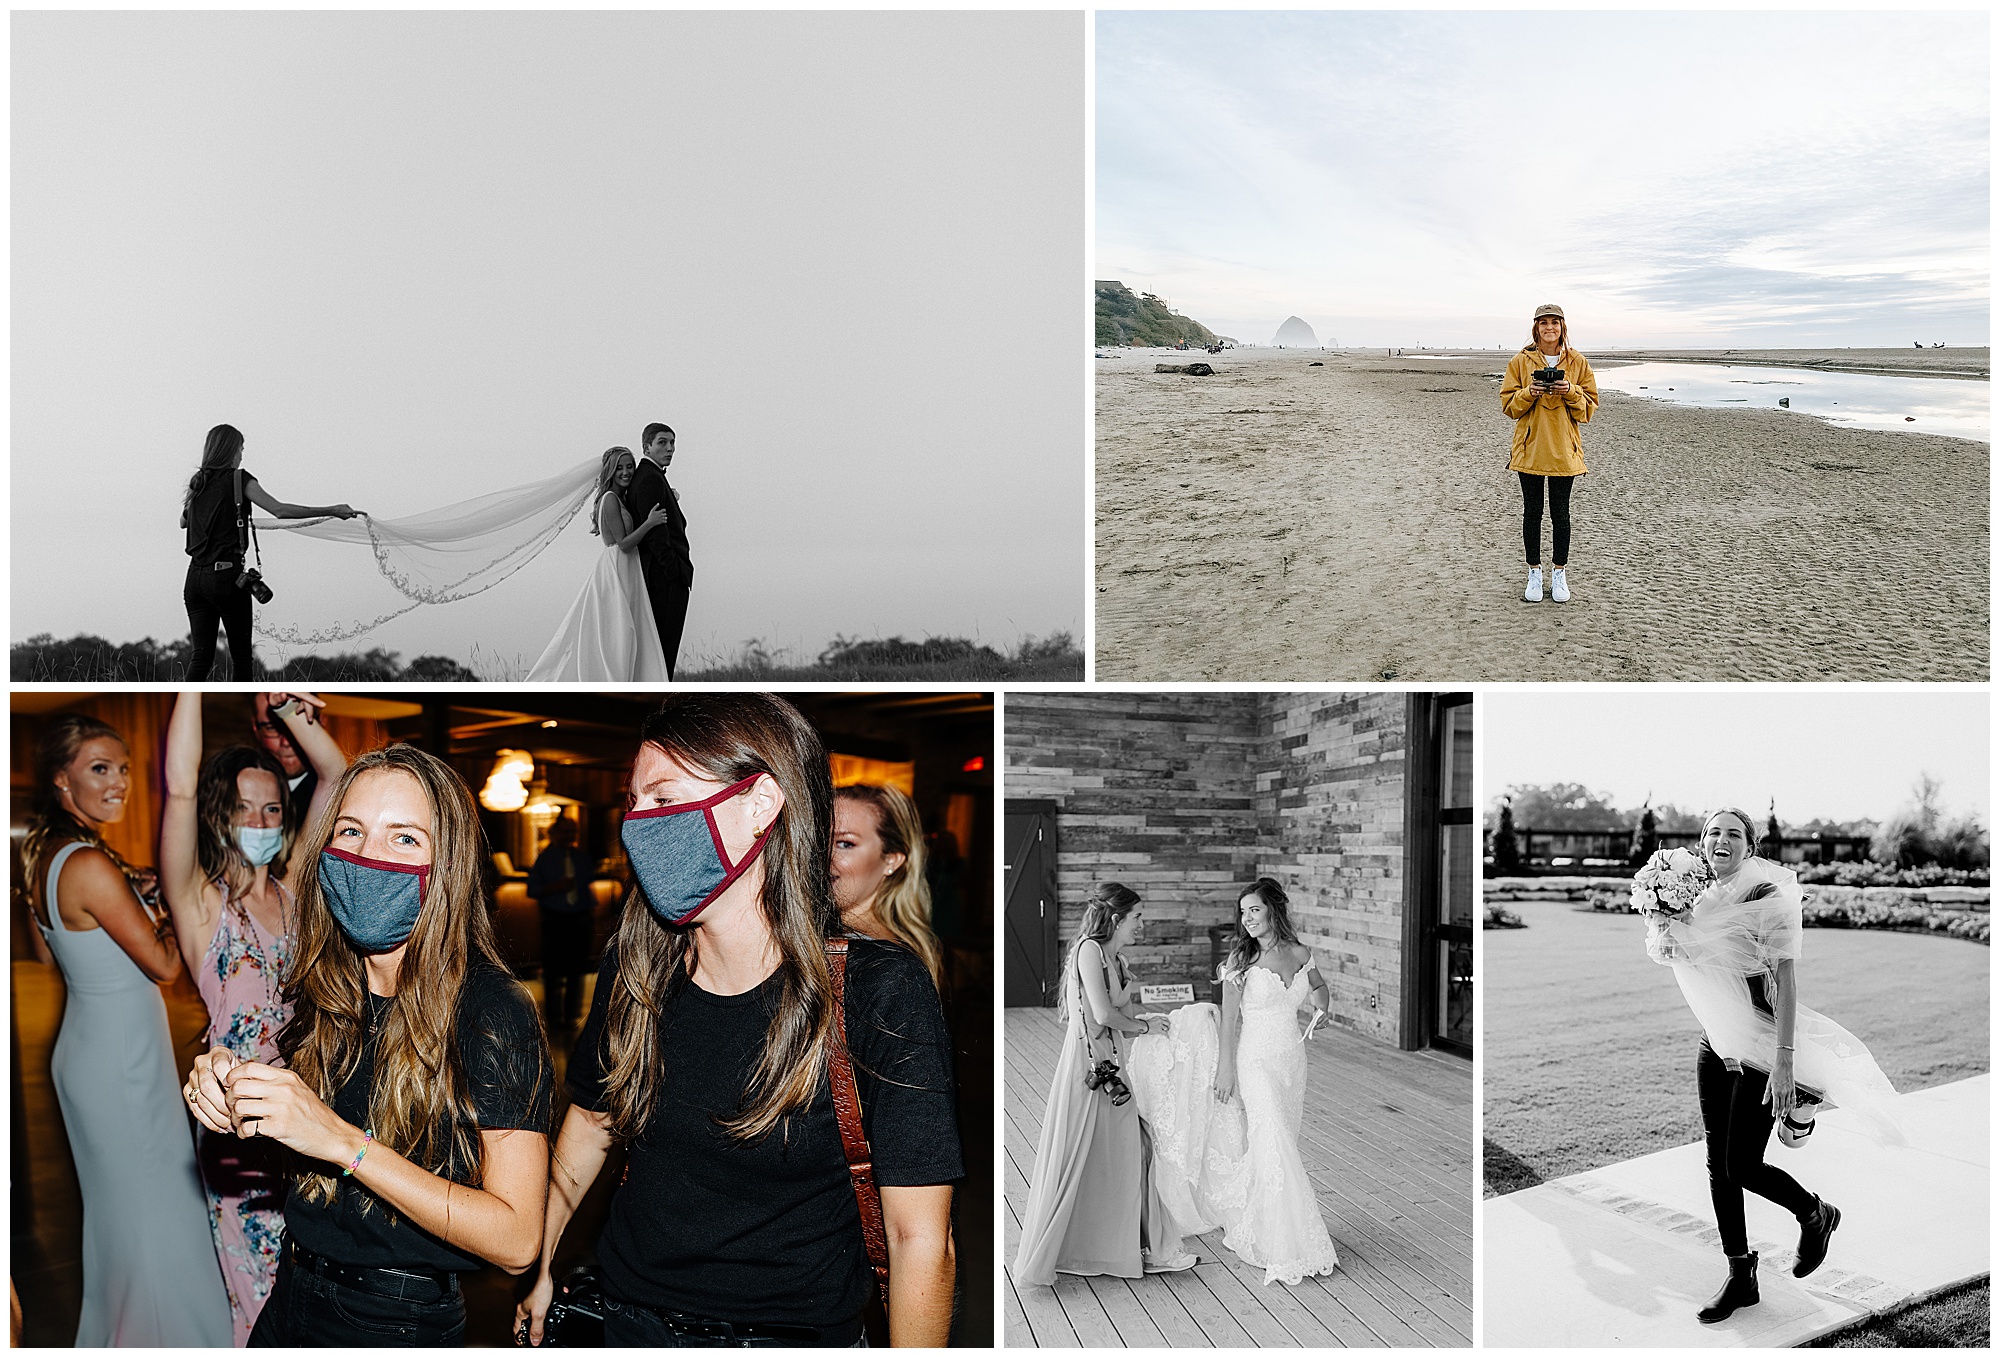 behind the scenes photos of a wedding photographer